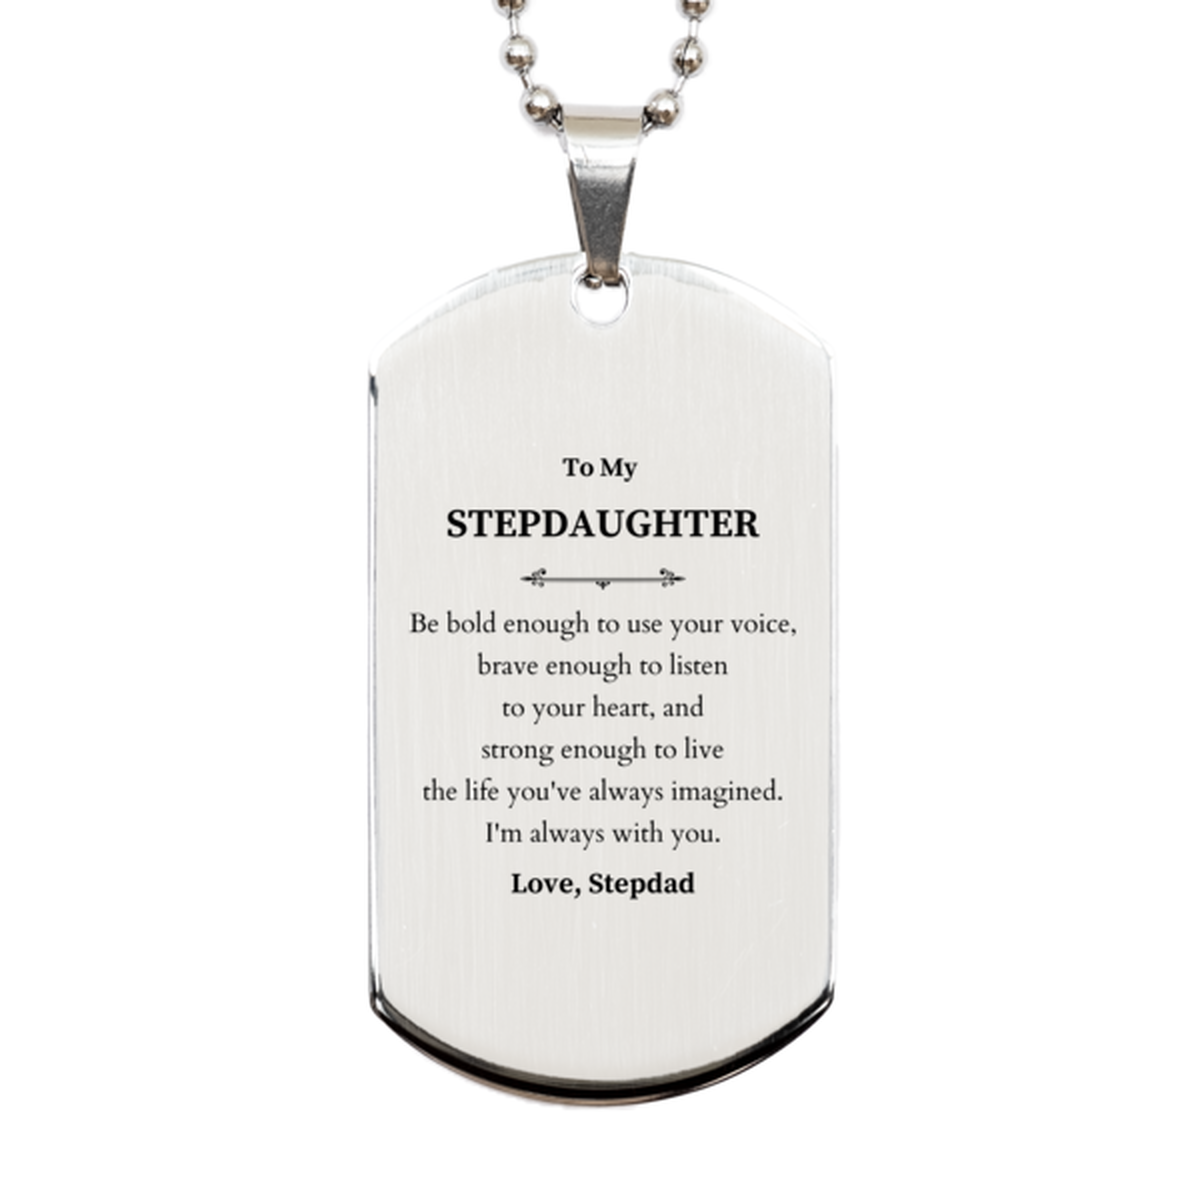 Keepsake Stepdaughter Silver Dog Tag Gift Idea Graduation Christmas Birthday Stepdaughter from Stepdad, Stepdaughter Be bold enough to use your voice, brave enough to listen to your heart. Love, Stepdad